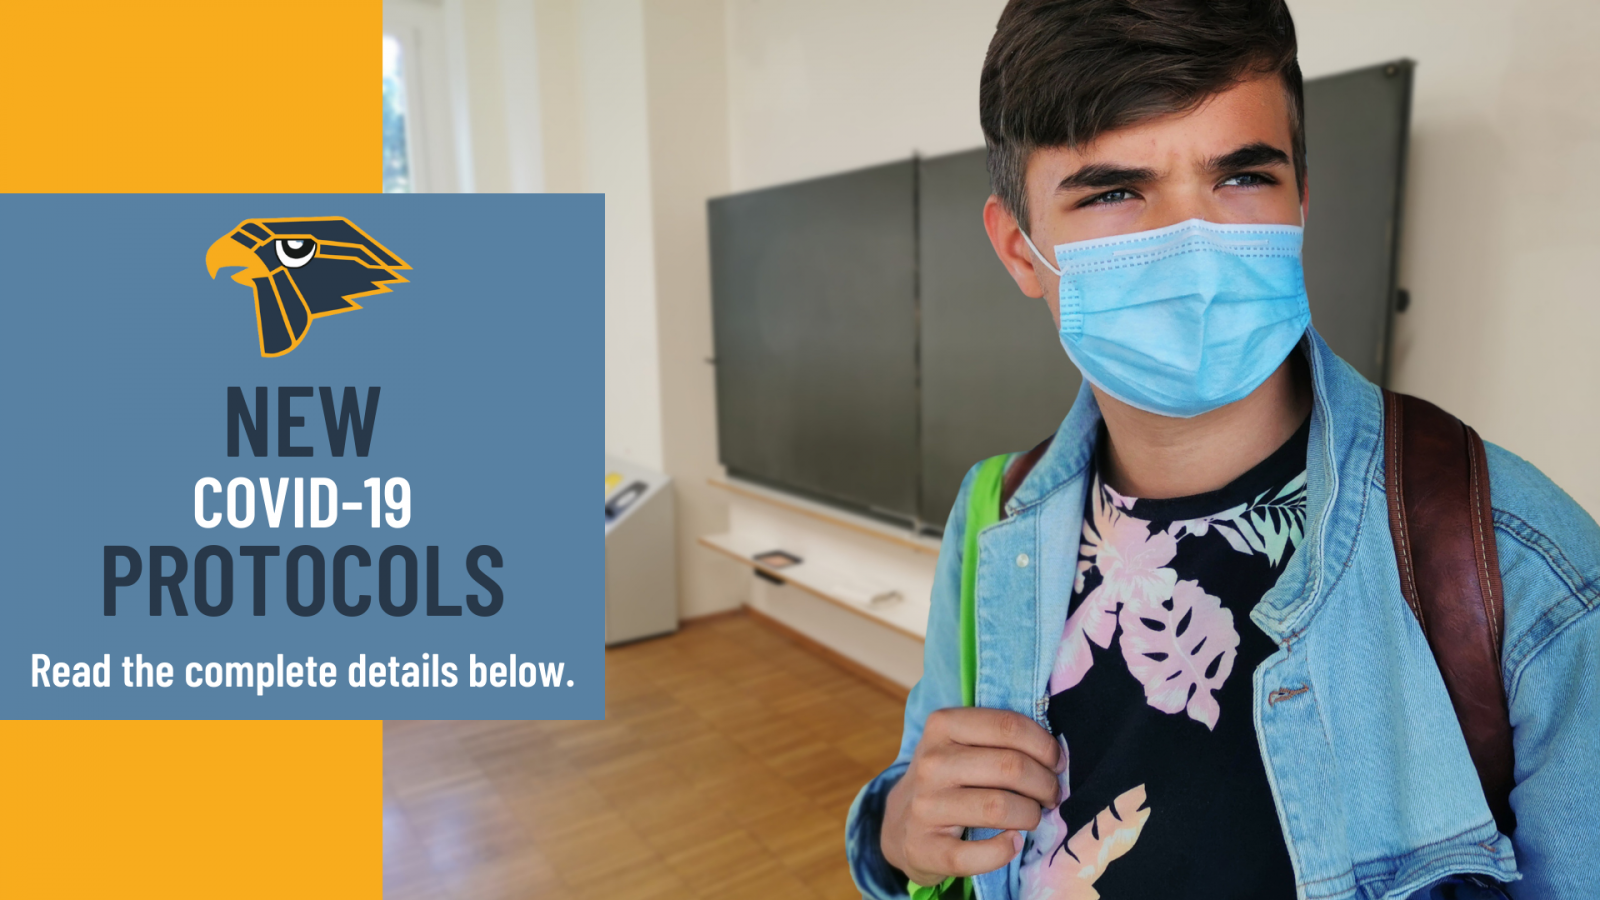 "New COVID-19 Protocols. Read the complete details below."